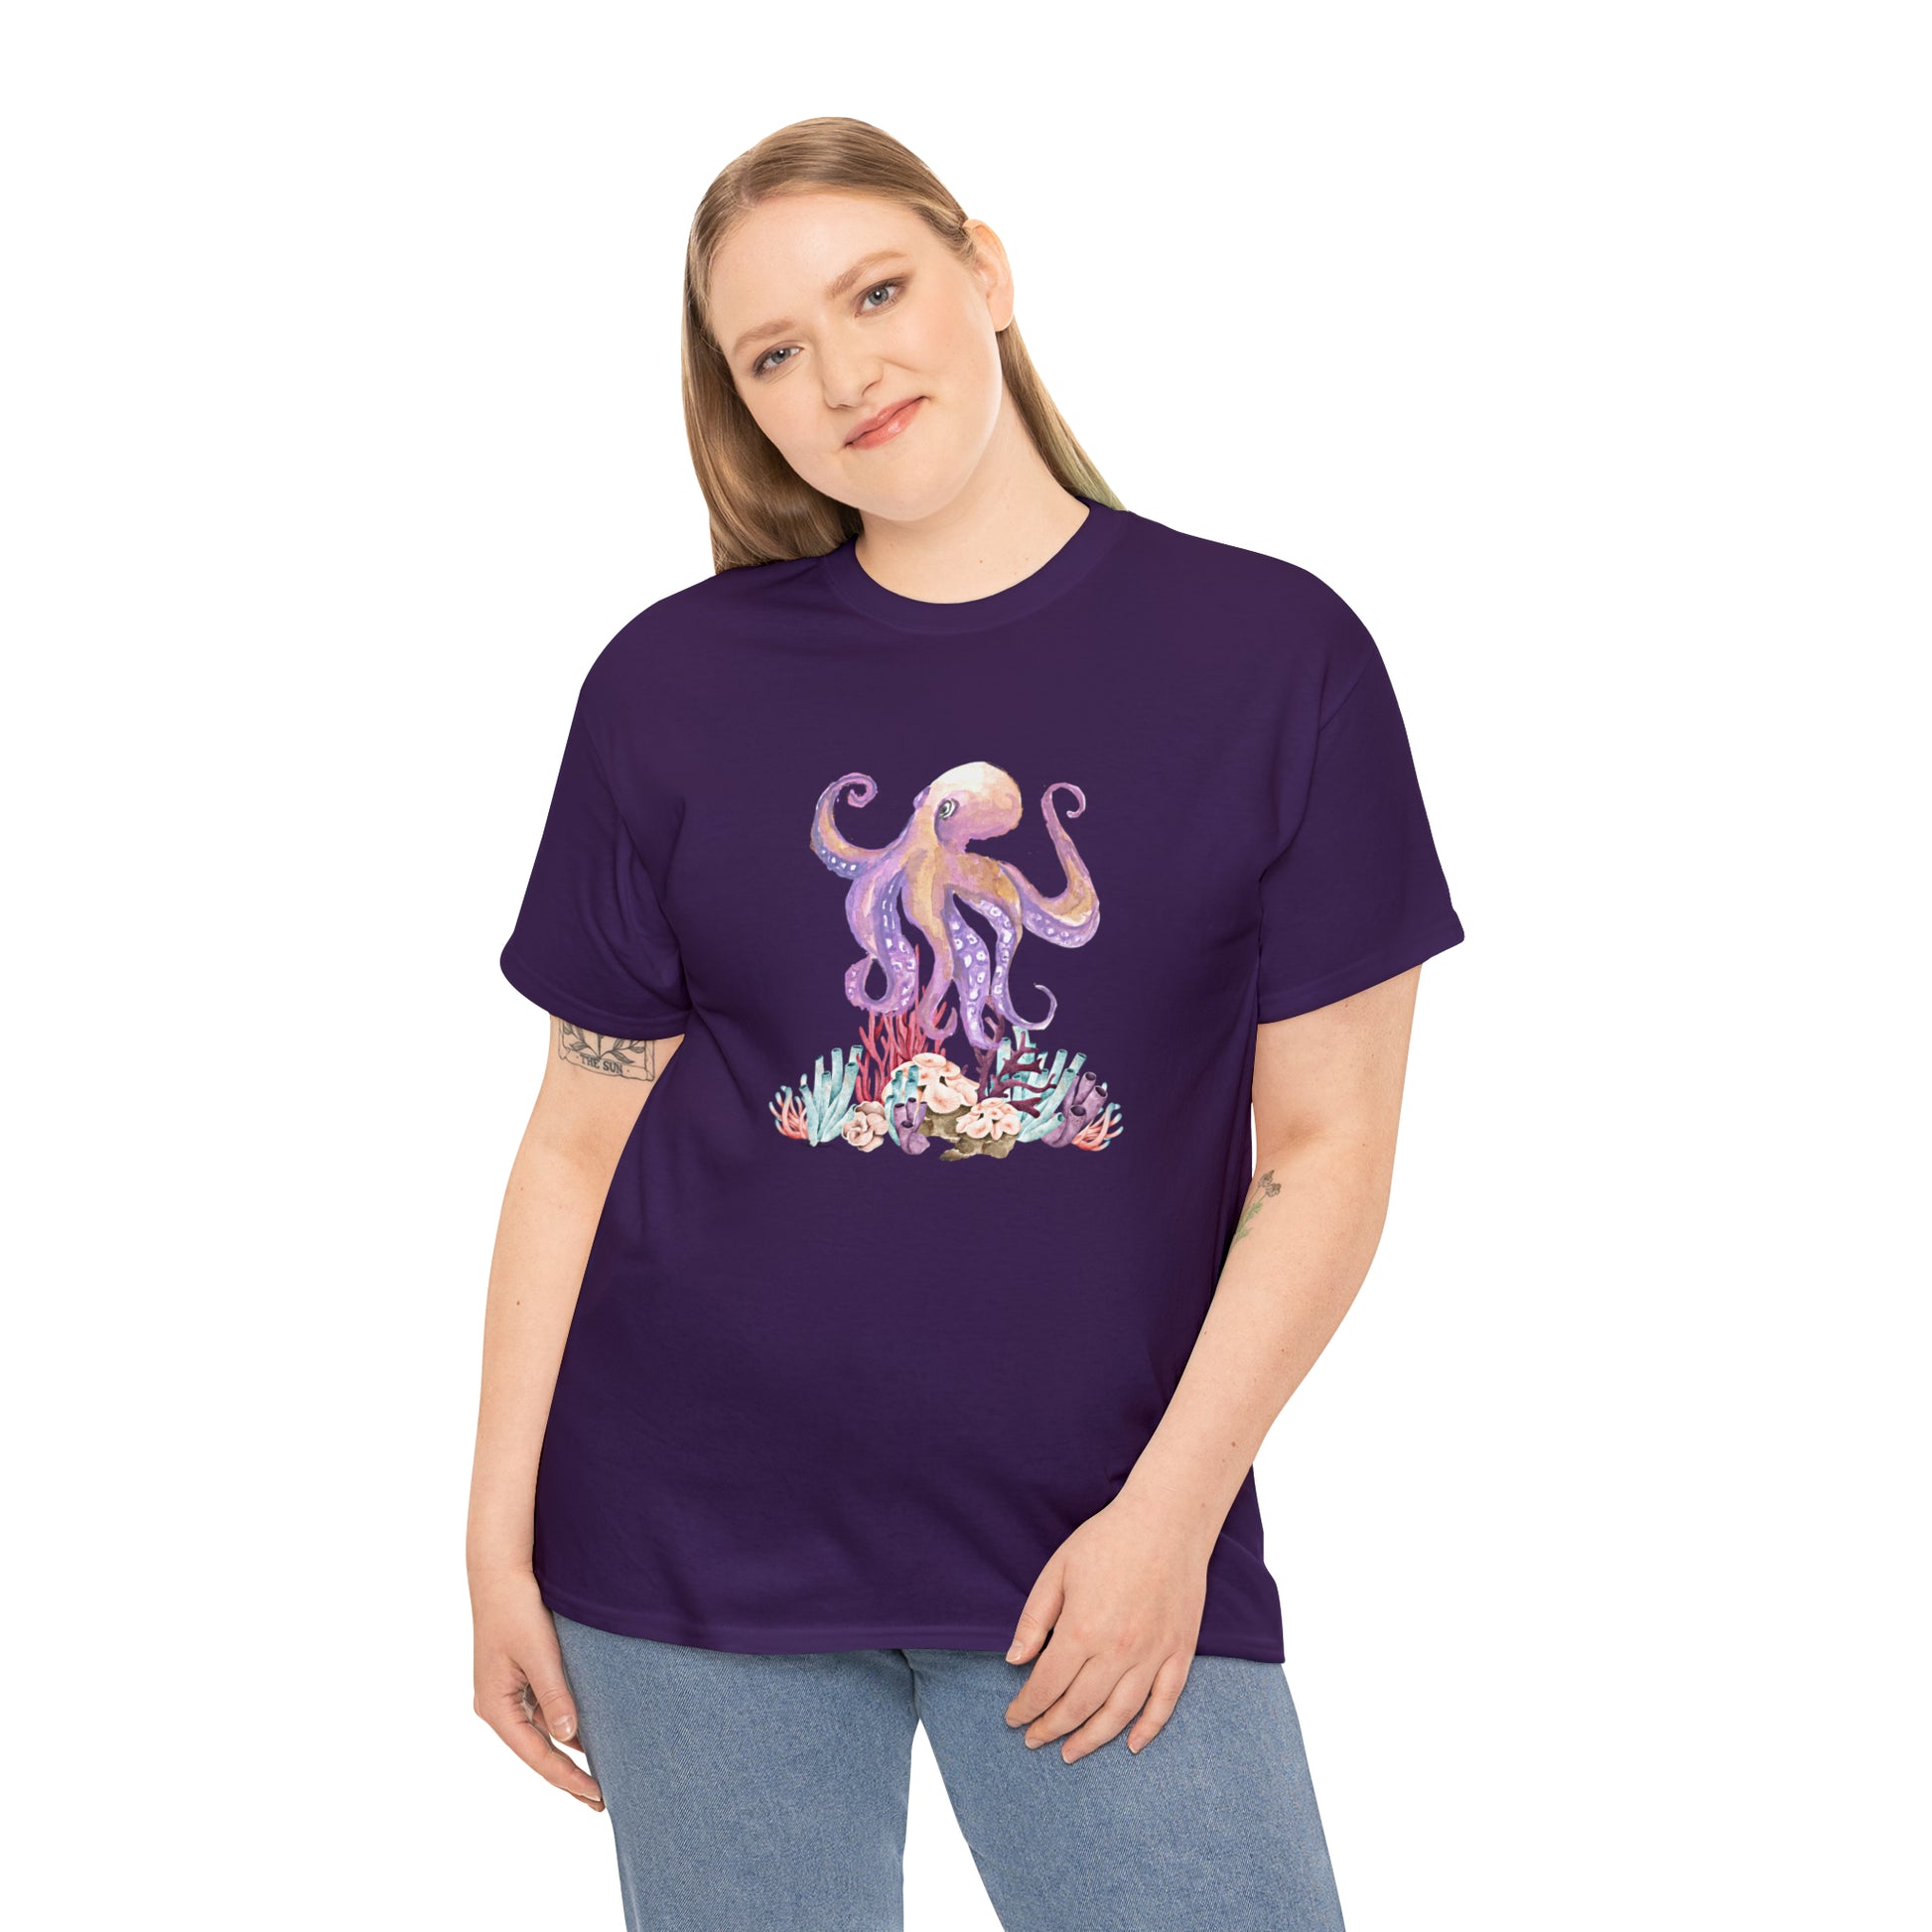 Mock up of a tall woman wearing the Purple shirt